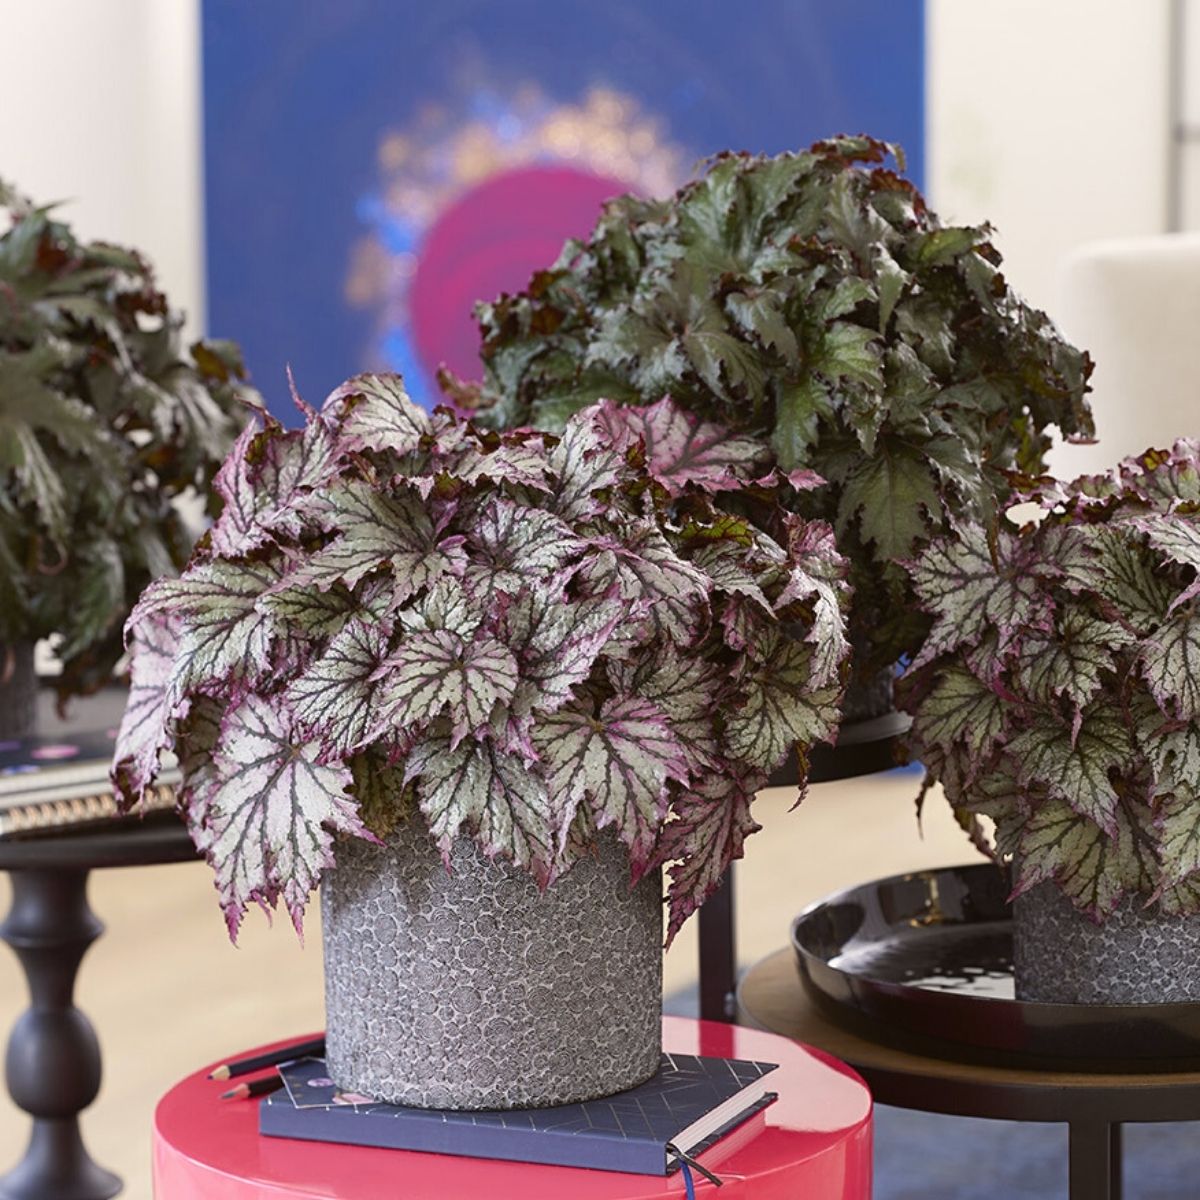 Two latest begonia varieties launched by Beekenkamp on Thursd